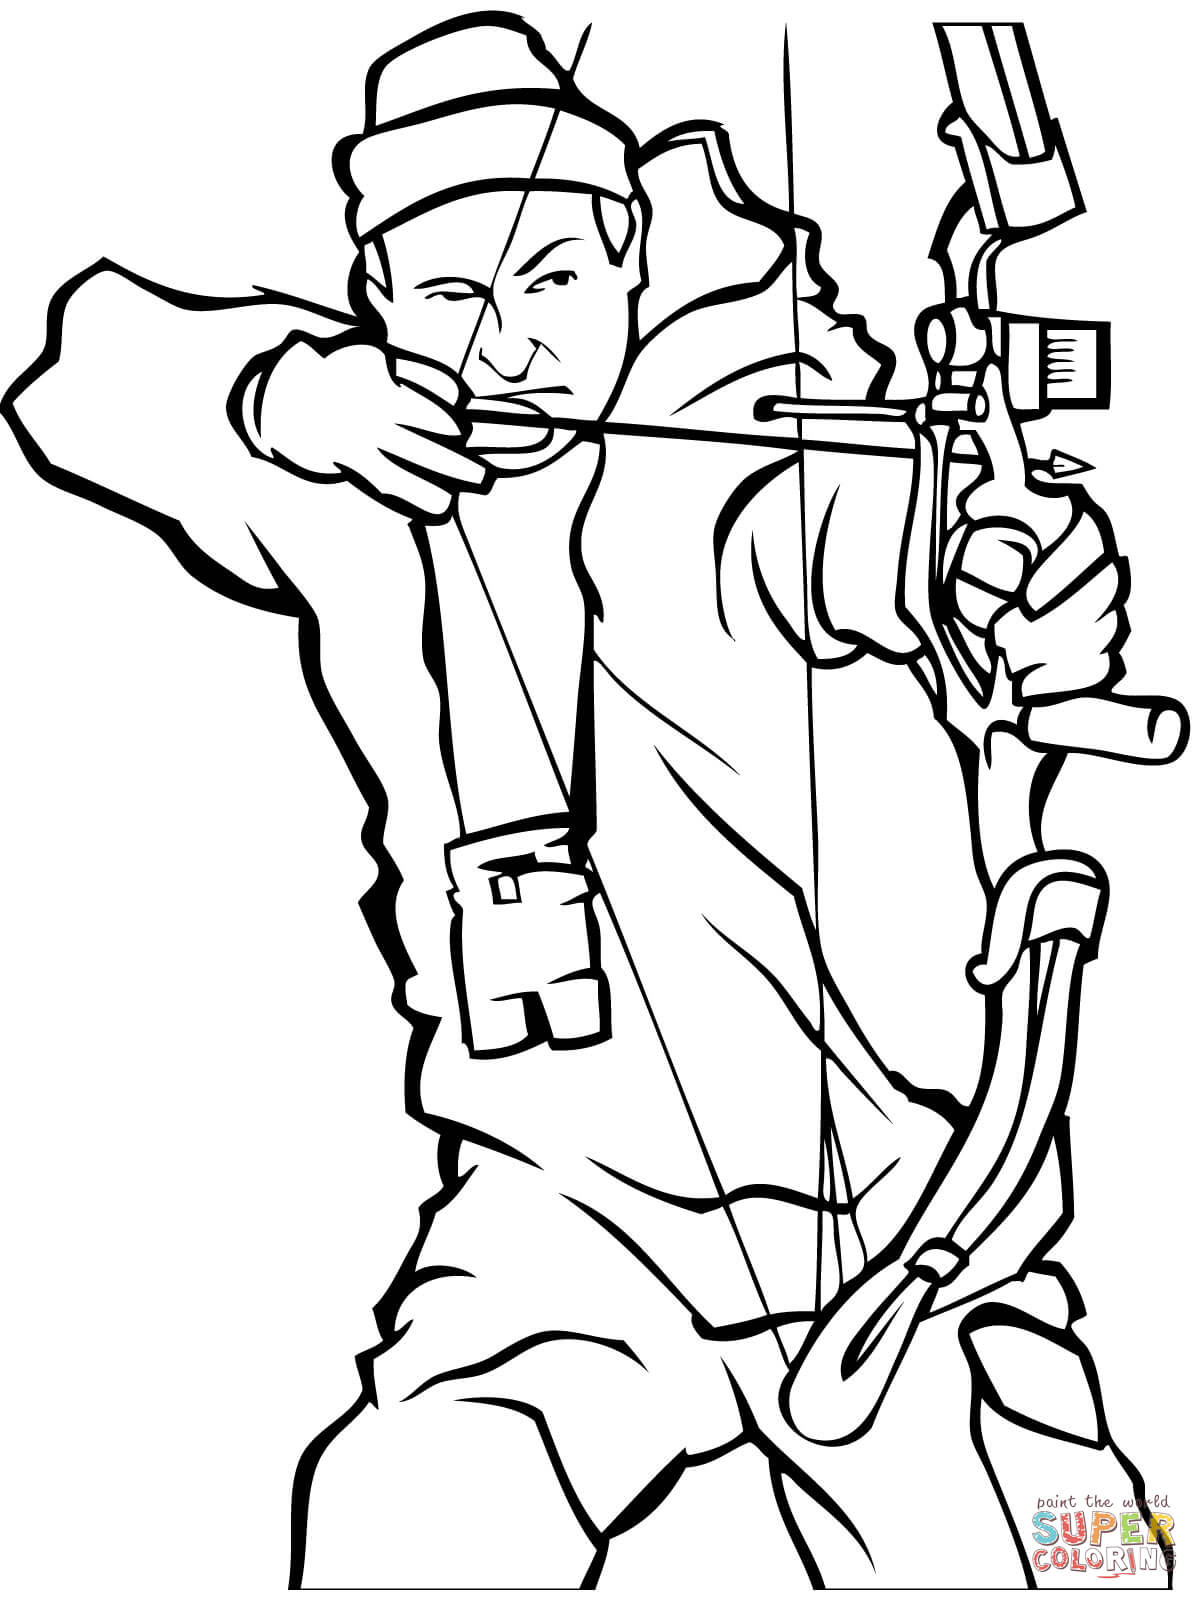 Download Hunting Coloring Page - Coloring Home